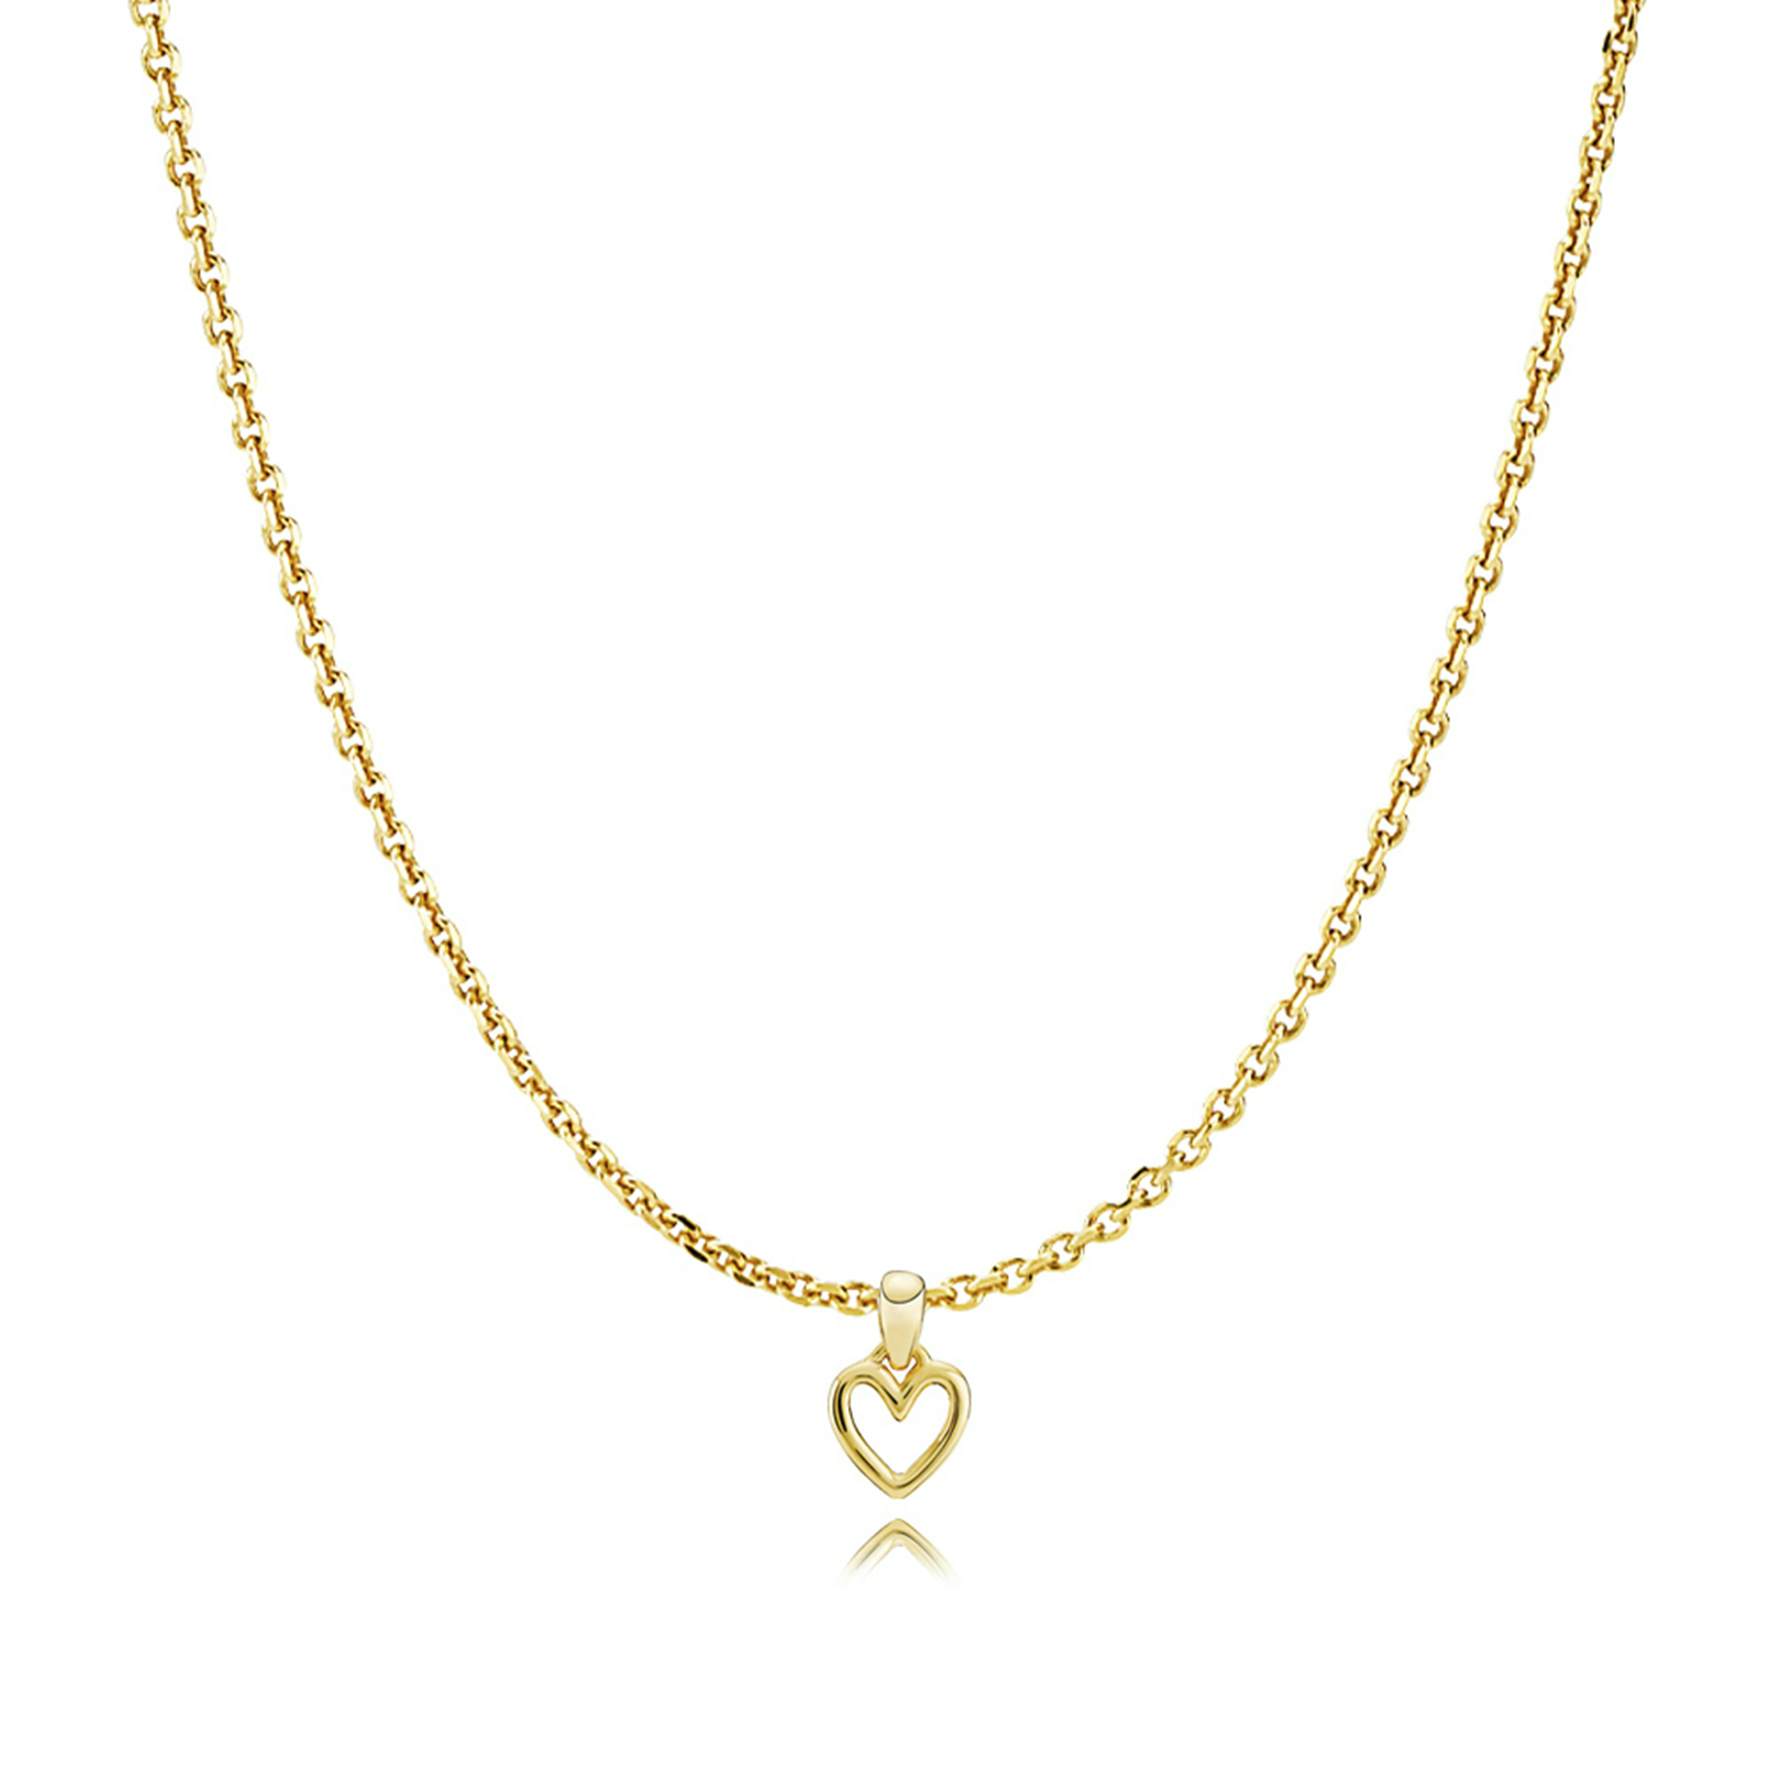 Ringlet Mentor dør spejl Beautiful Love Charity Necklace from Izabel Camille in Goldplated-Silver  Sterling 925